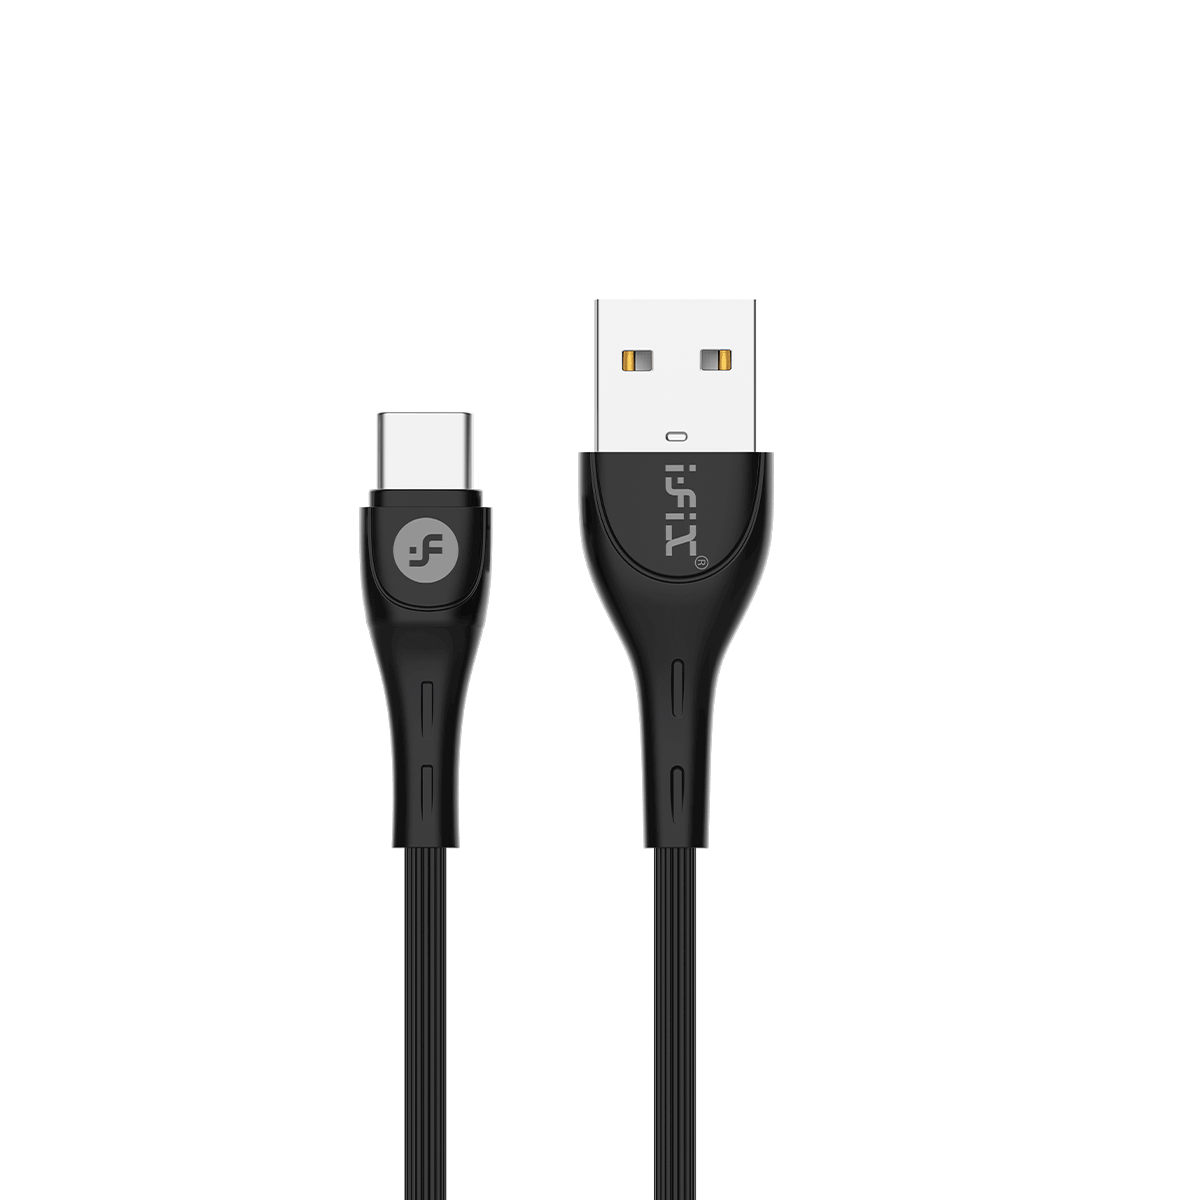 IF-004 Dual USB Port Type-C  3.4A Fast charger